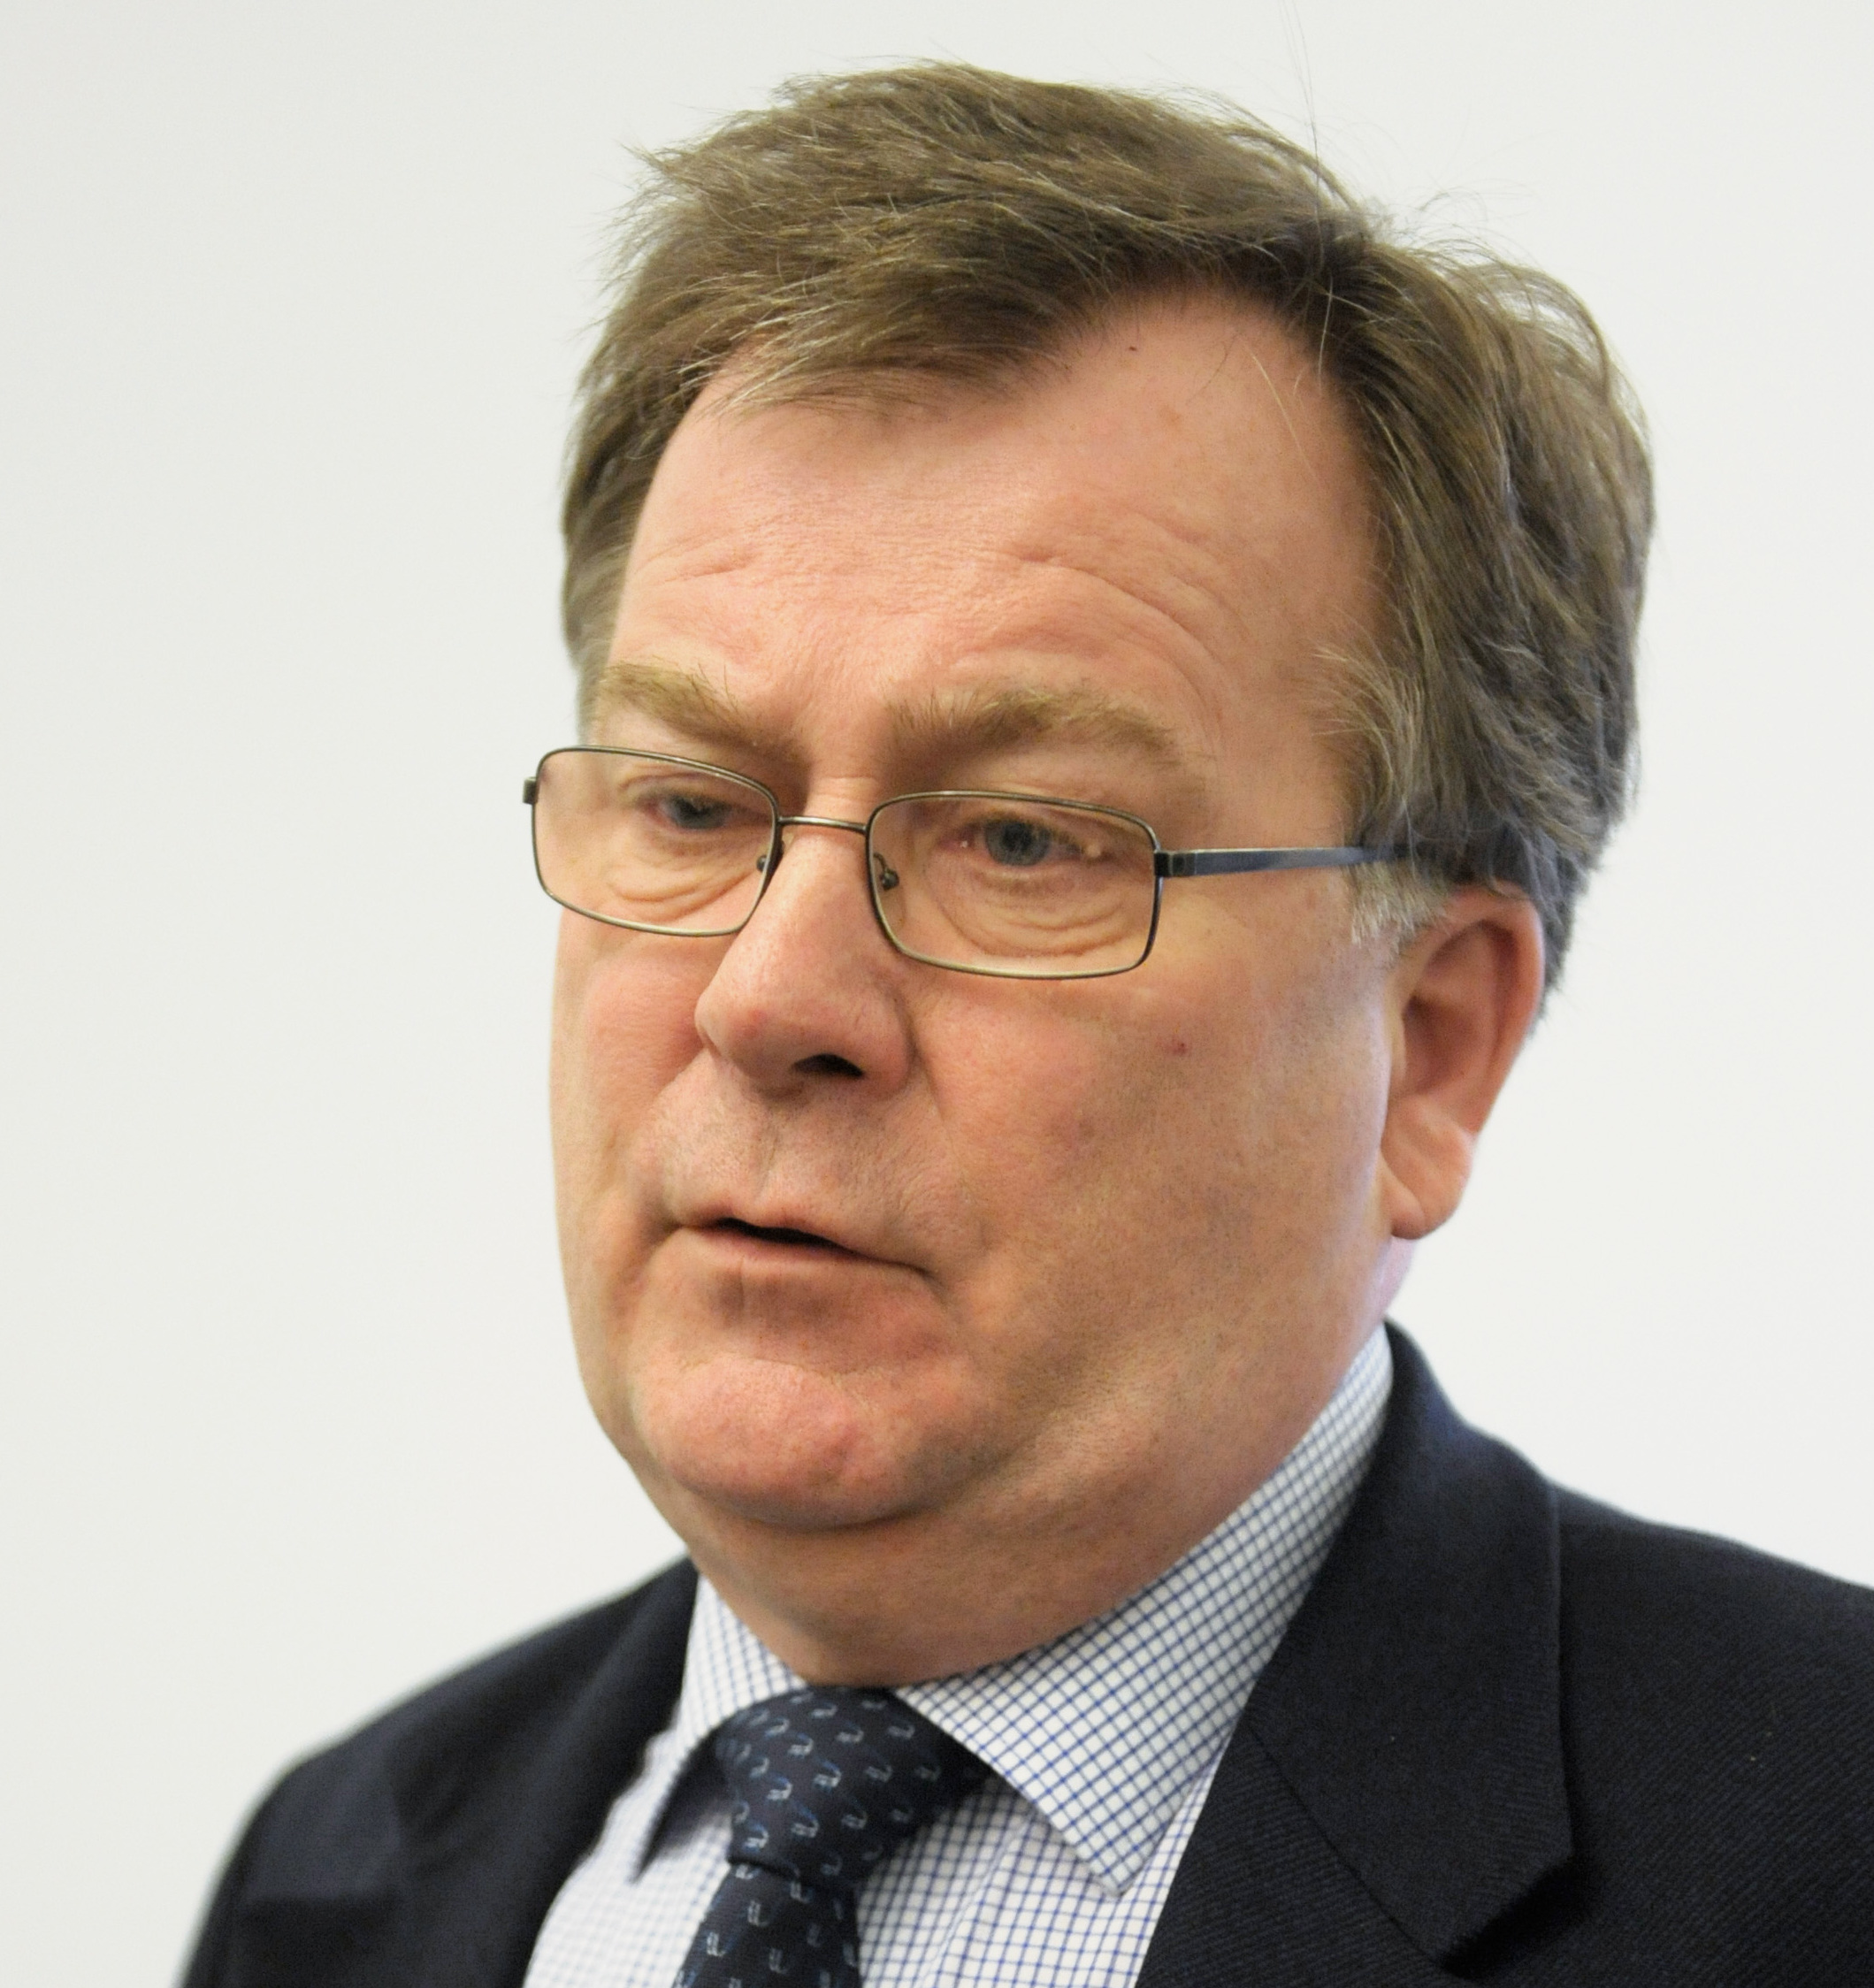 Former Danish defence minister says he has been charged over alleged state secret leaks